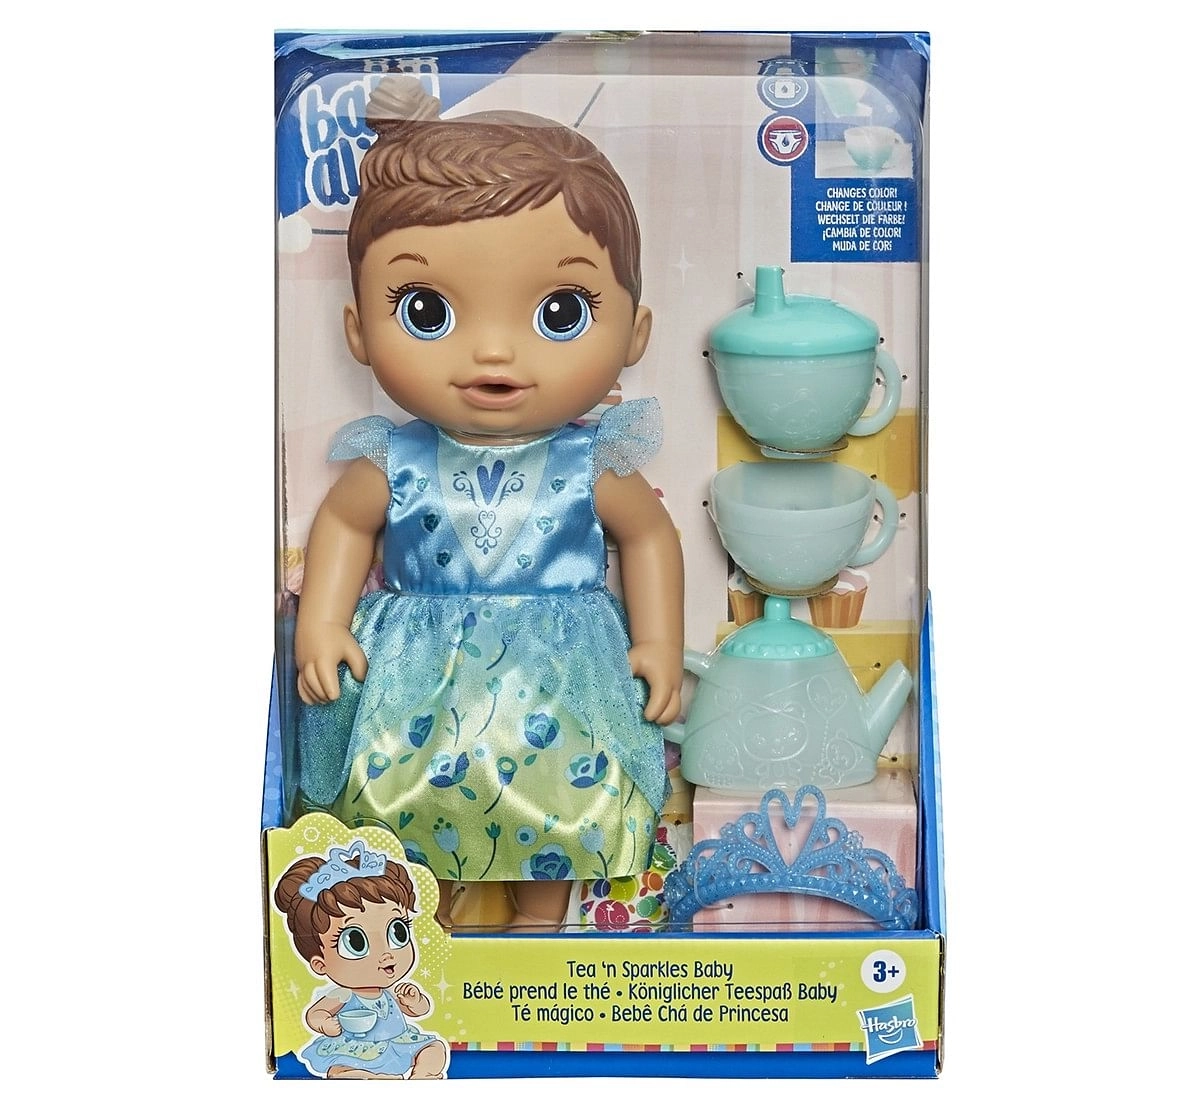 Baby Alive Tea ‘n Sparkles Baby Doll, Color-Changing Tea Set, Doll Accessories, Drinks and Wets, Brown Hair Toy for Kids Ages 3Y+